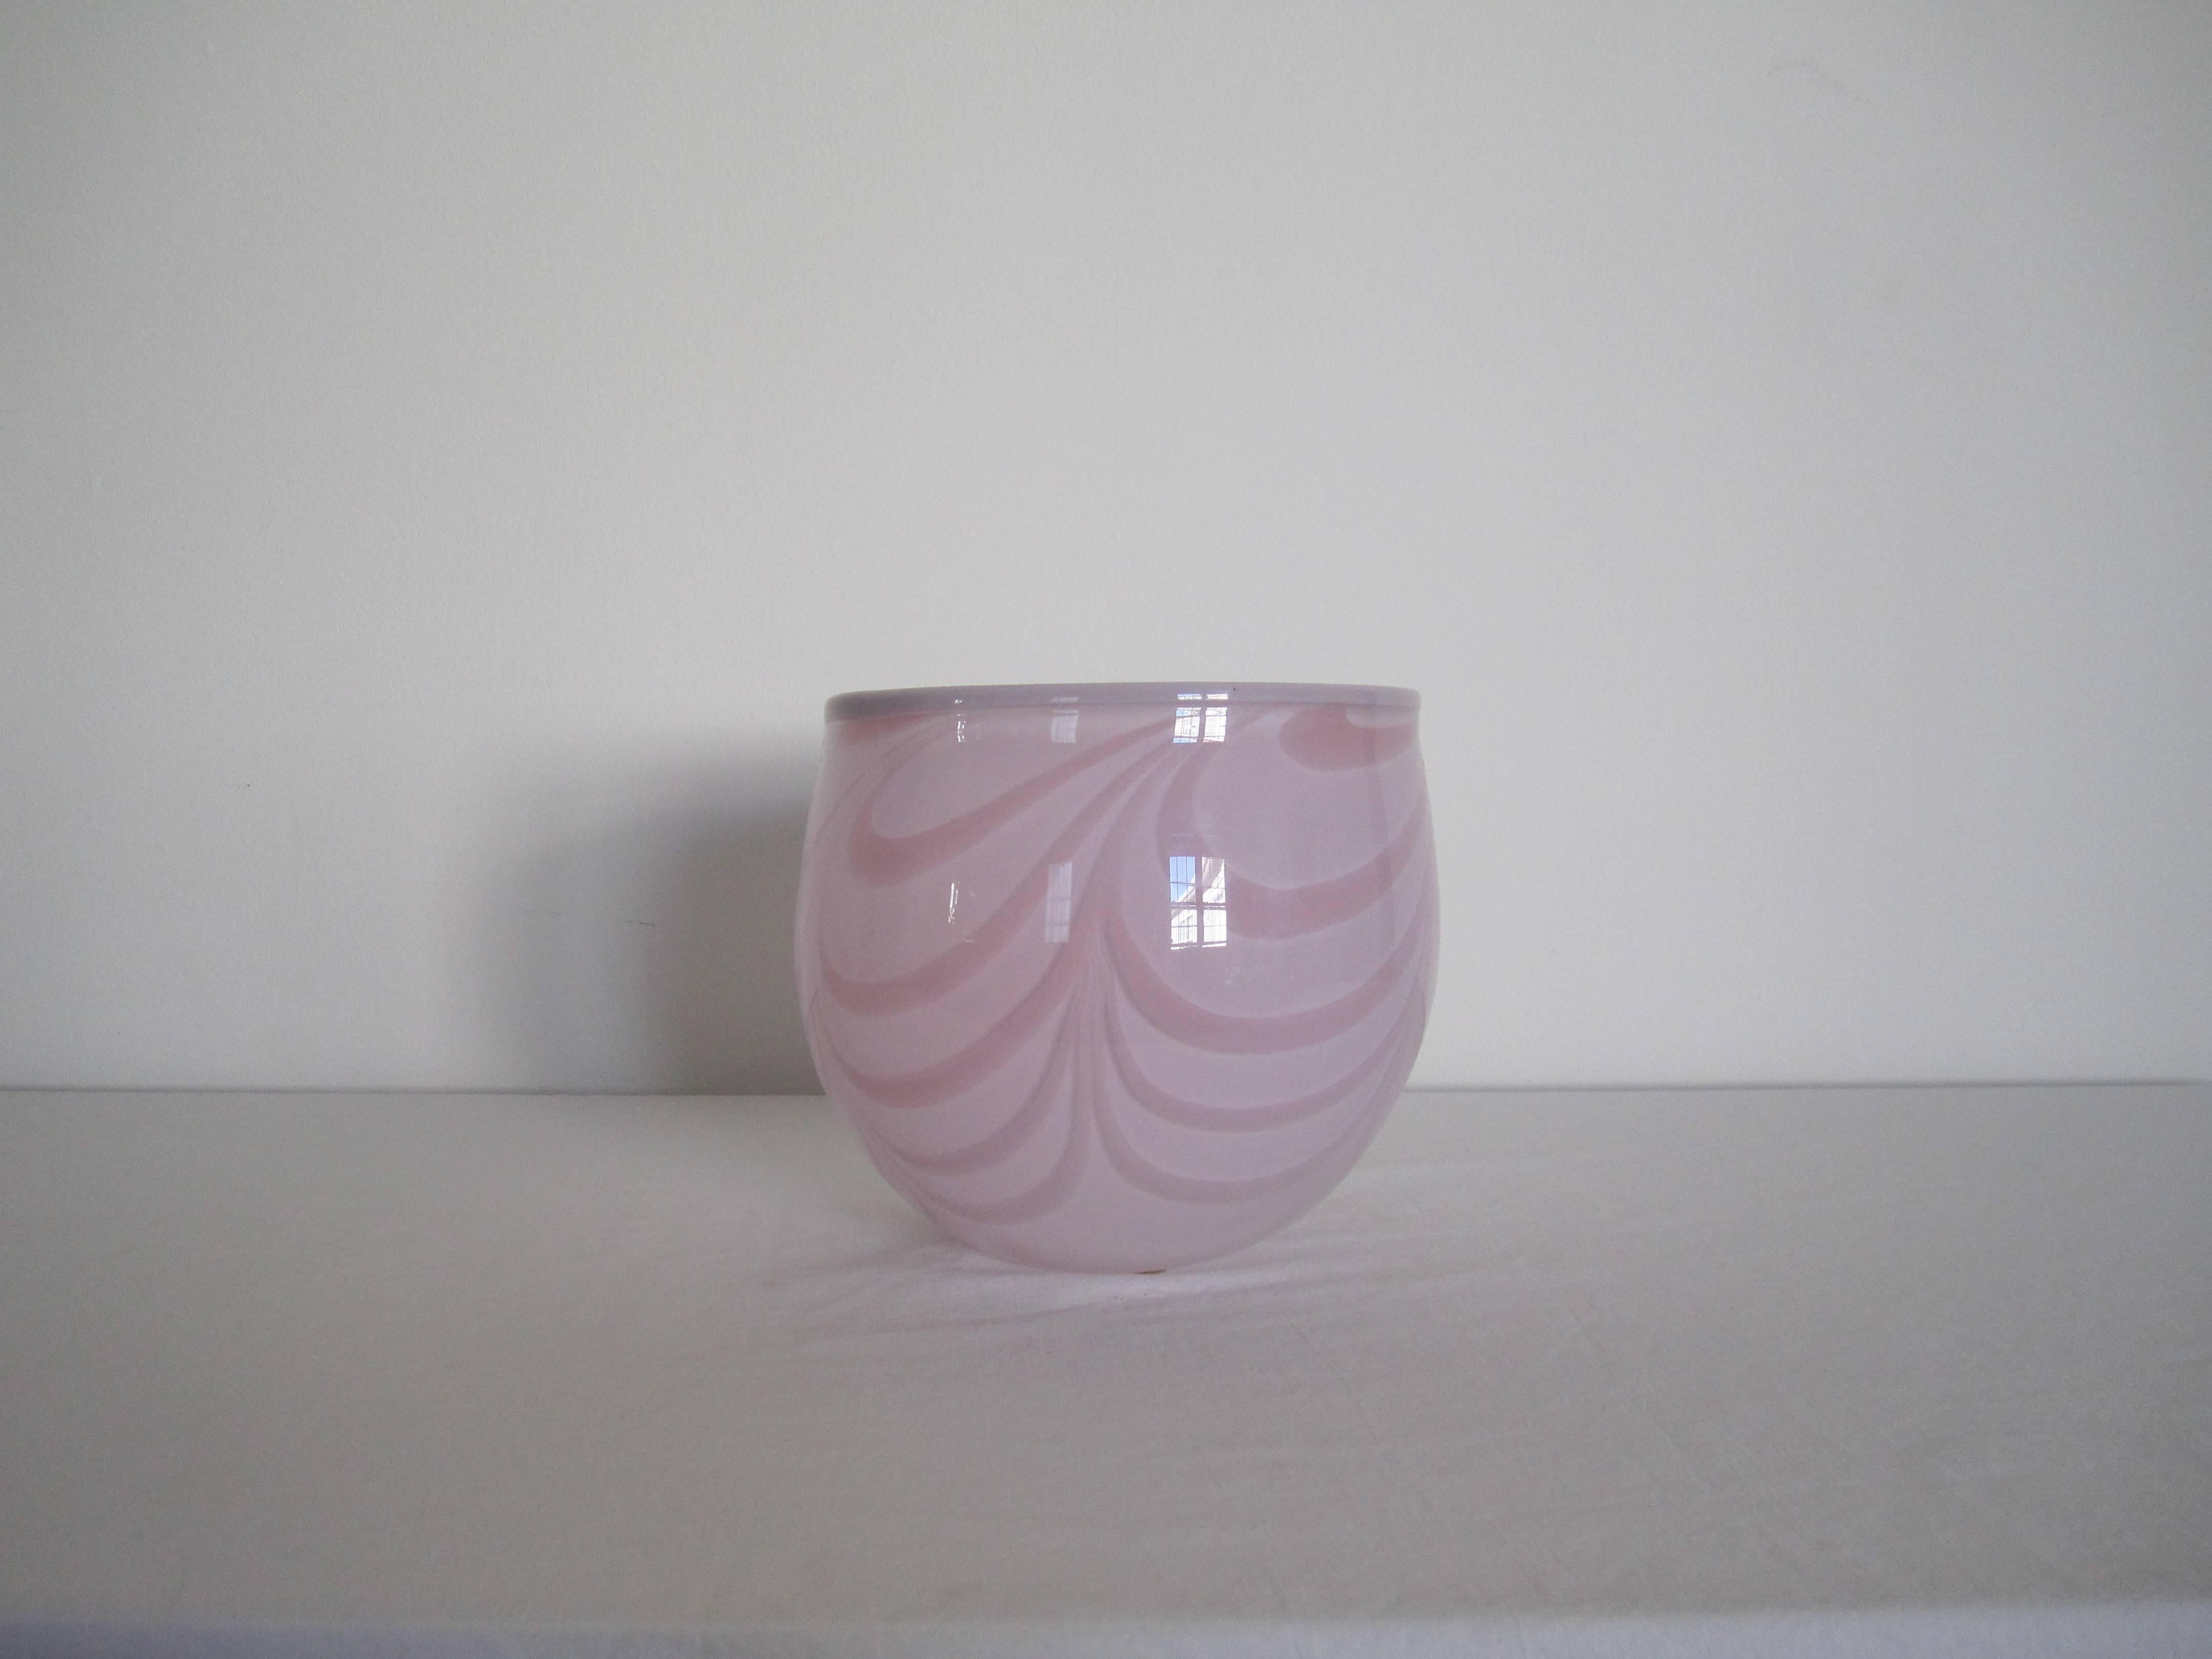 A beautiful Scandinavian art glass bowl from Kosta Boda by designer Anna Ehrner, in a pink or rose colored art glass with a grey trim, circa 20th century, Sweden. Signed and numbered on bottom as show in image #7. 

